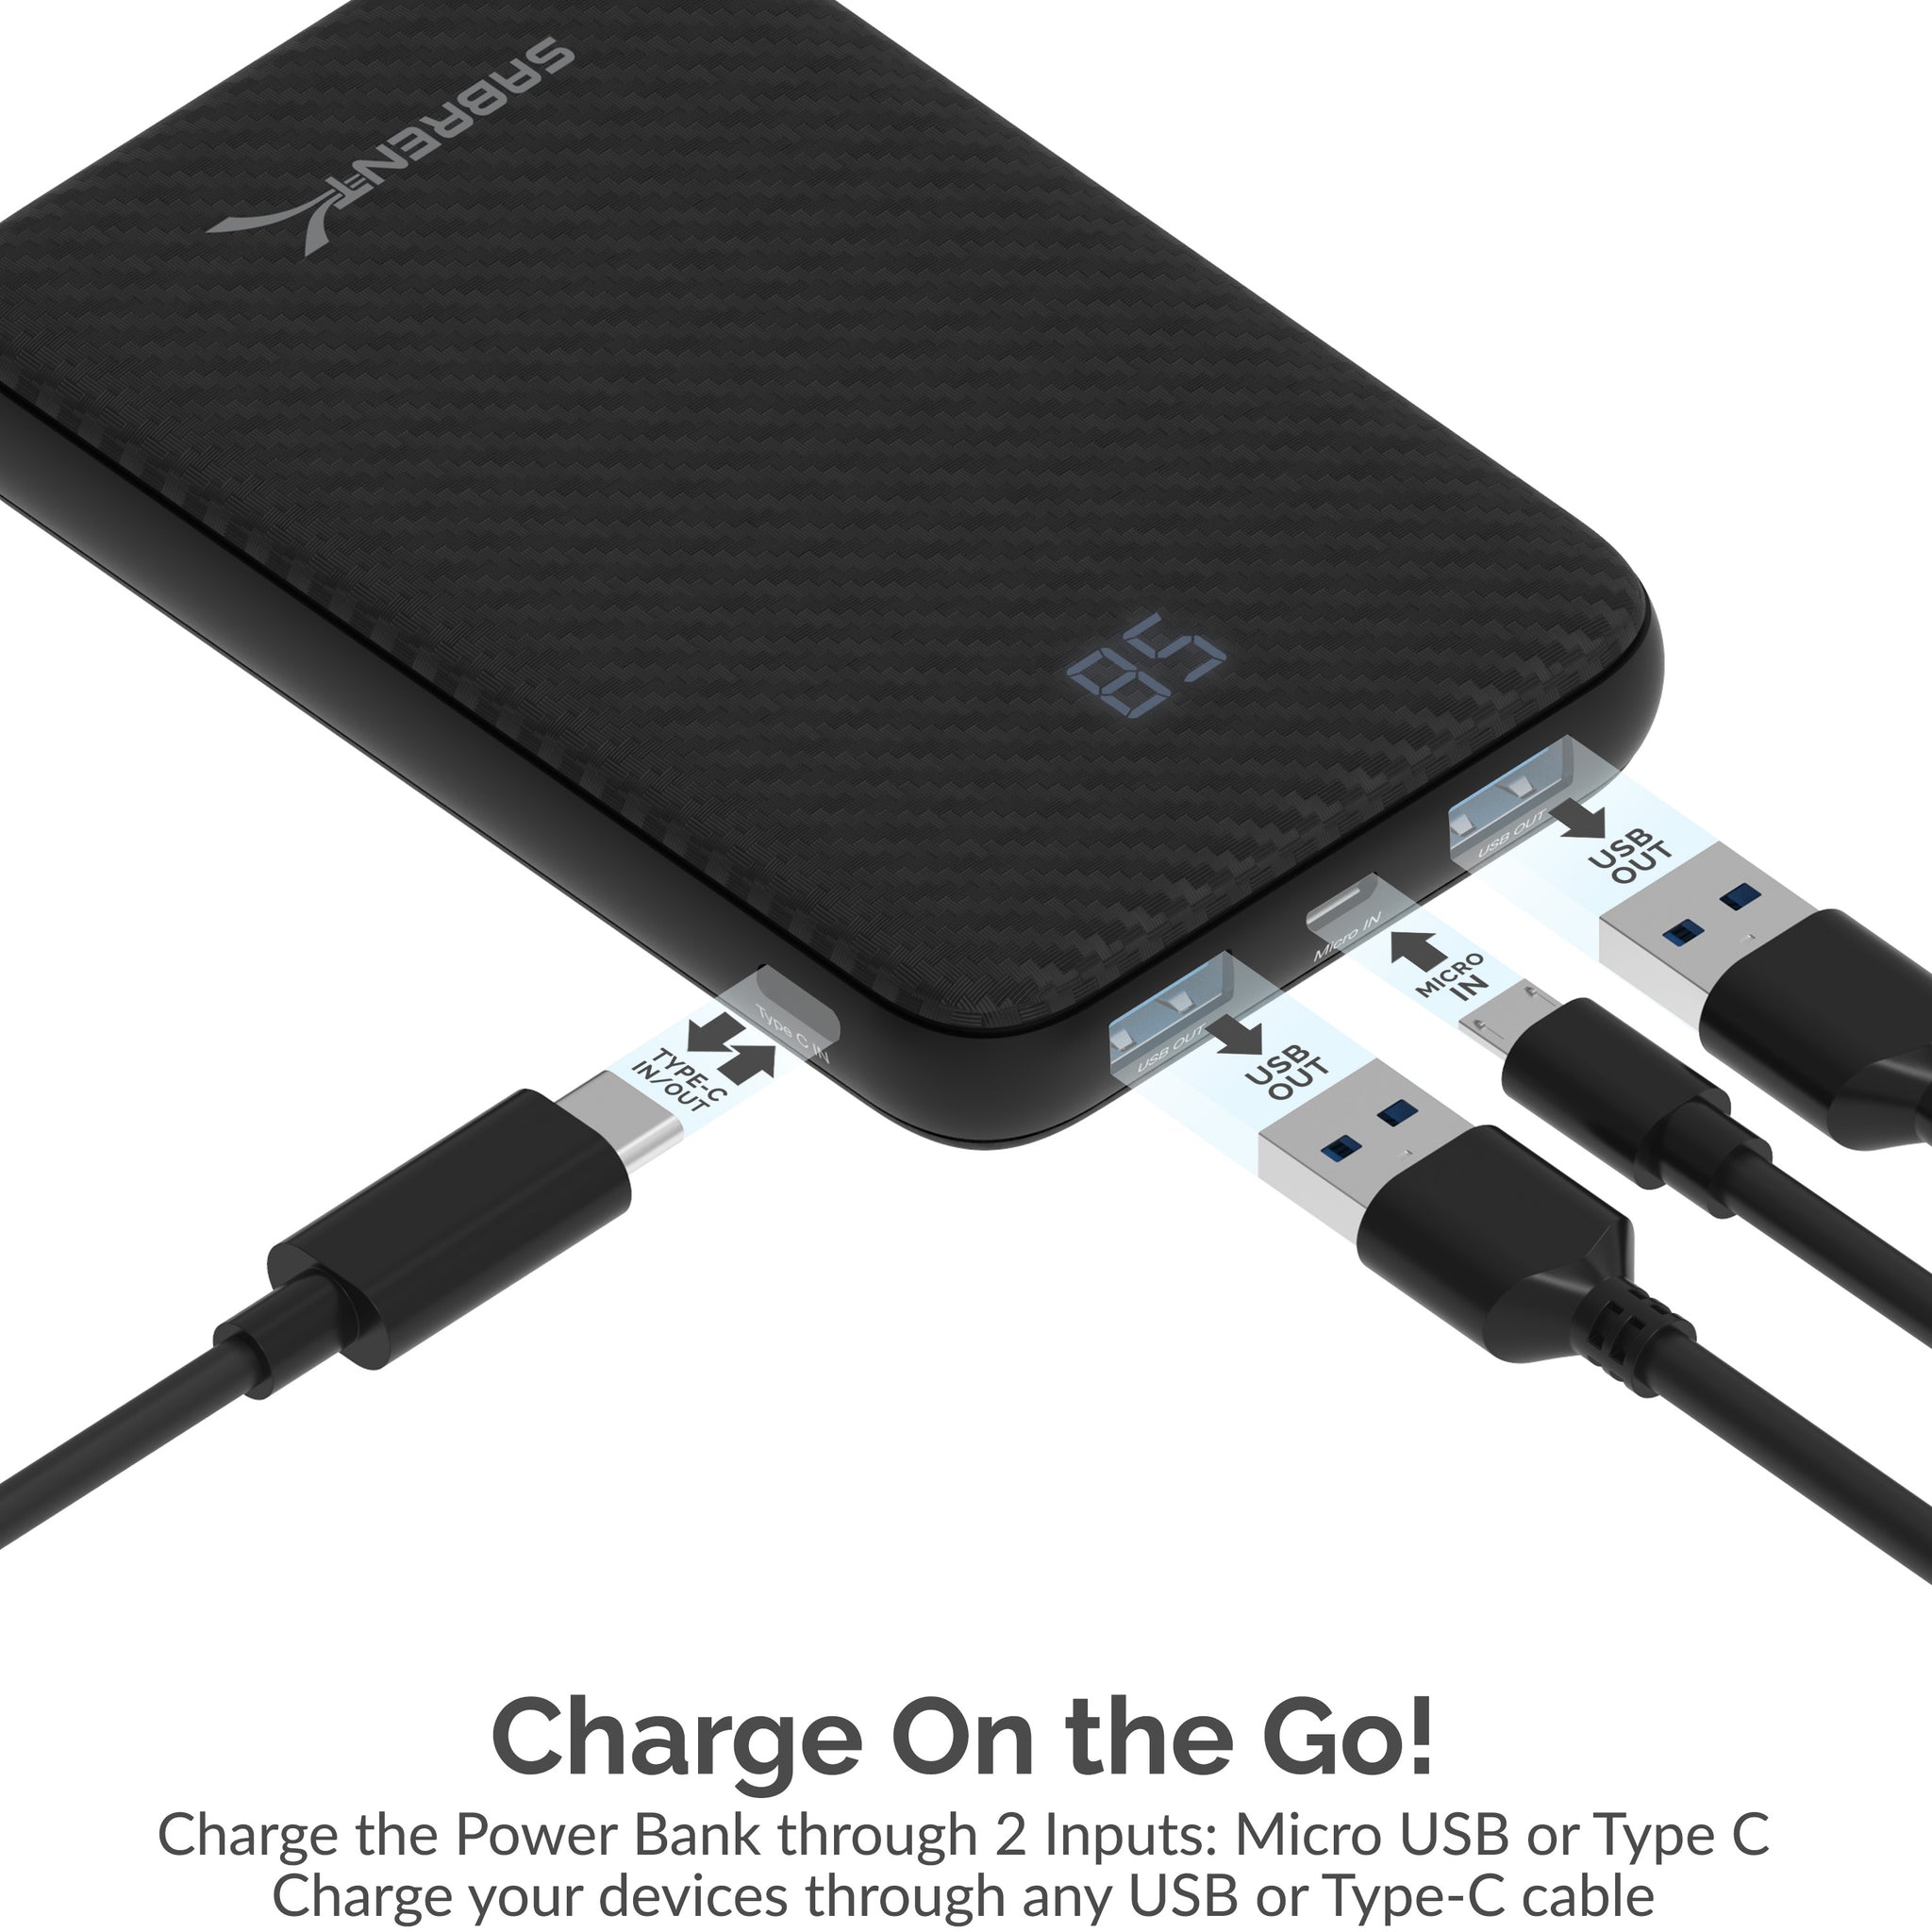 20000 mAh USB C PD Power Bank with Quick Charge 3.0 - Sabrent